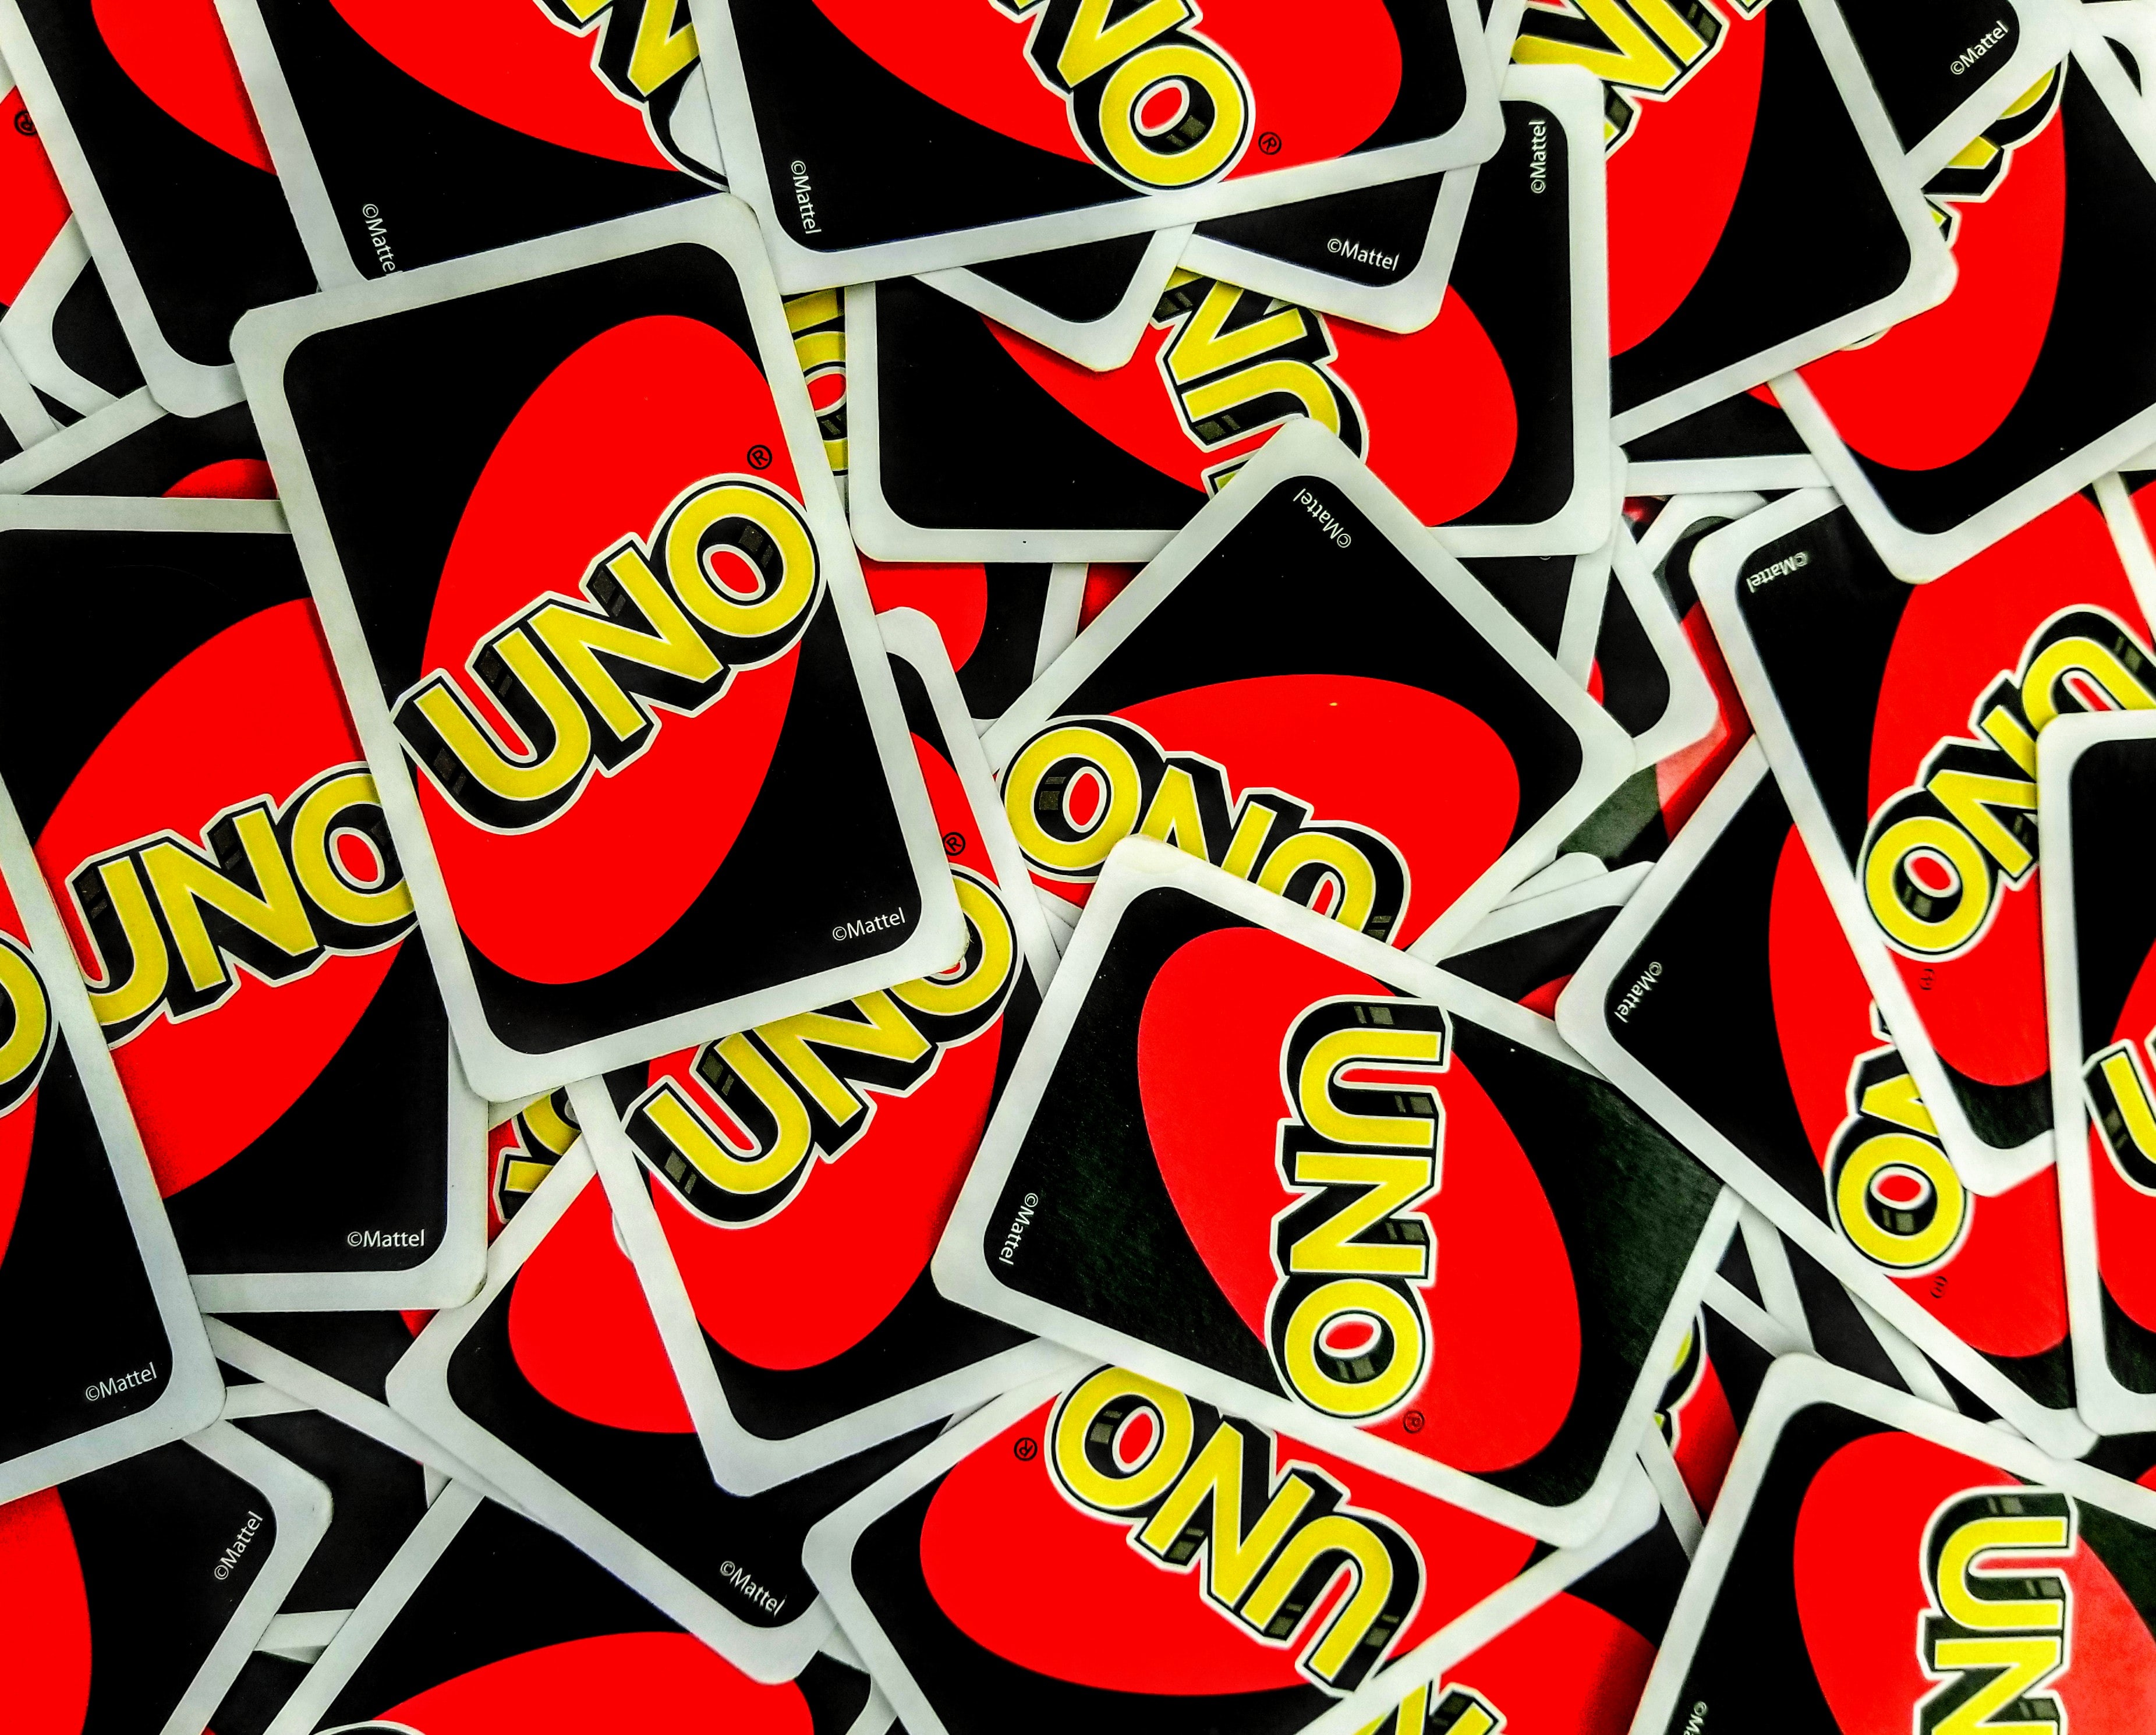 A collage of "Uno" cards piled among each other.